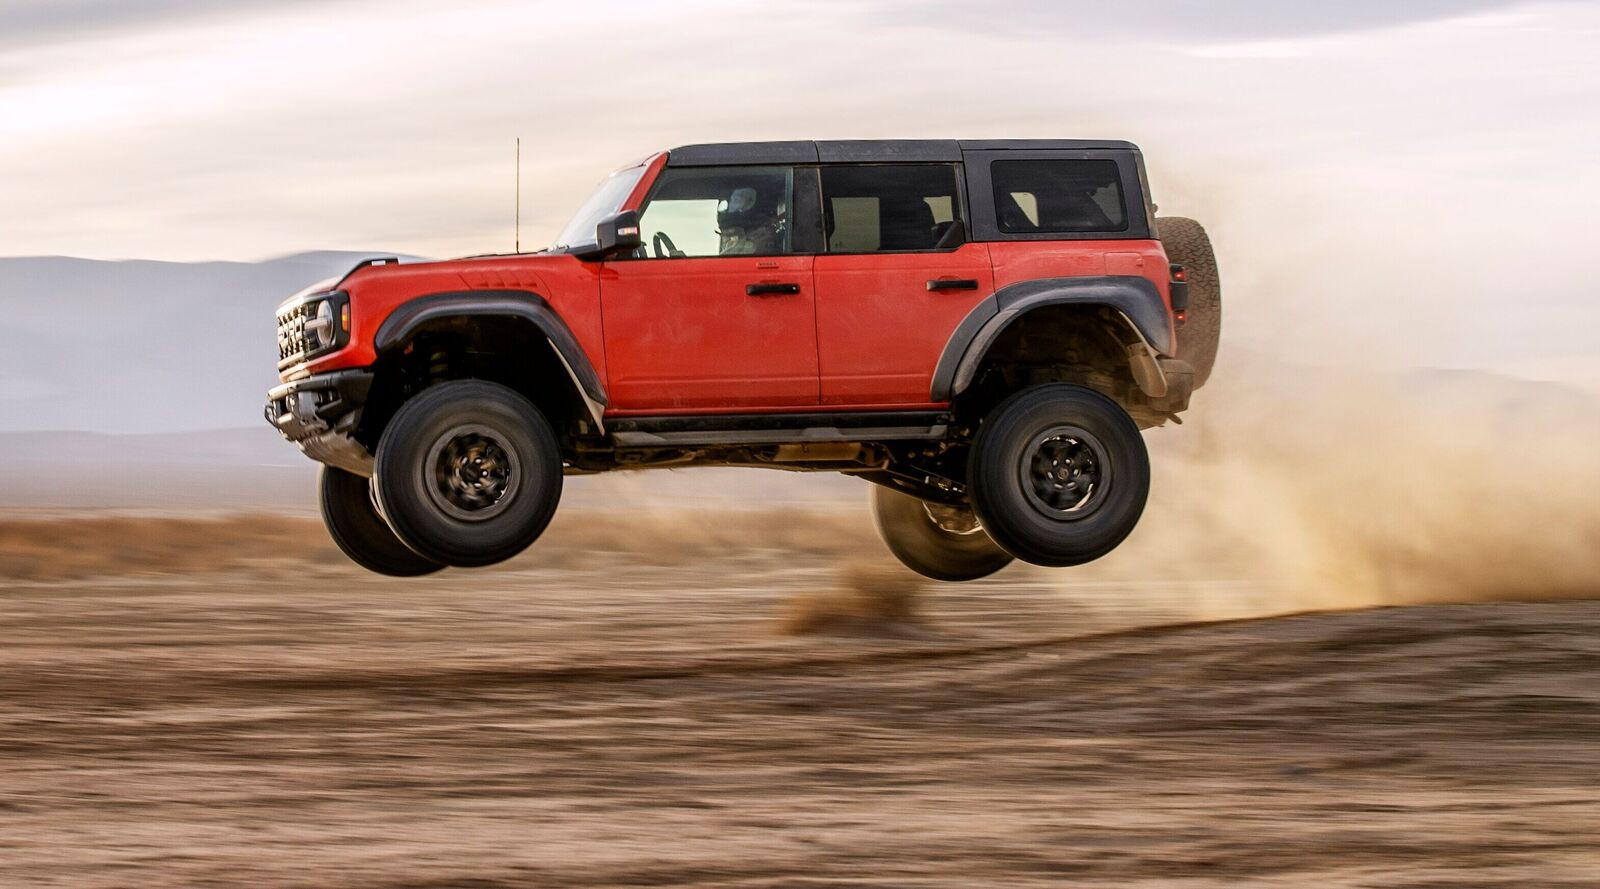 A flying automotive? 2022 Ford Bronco Raptor debuts with excessive off-roading expertise